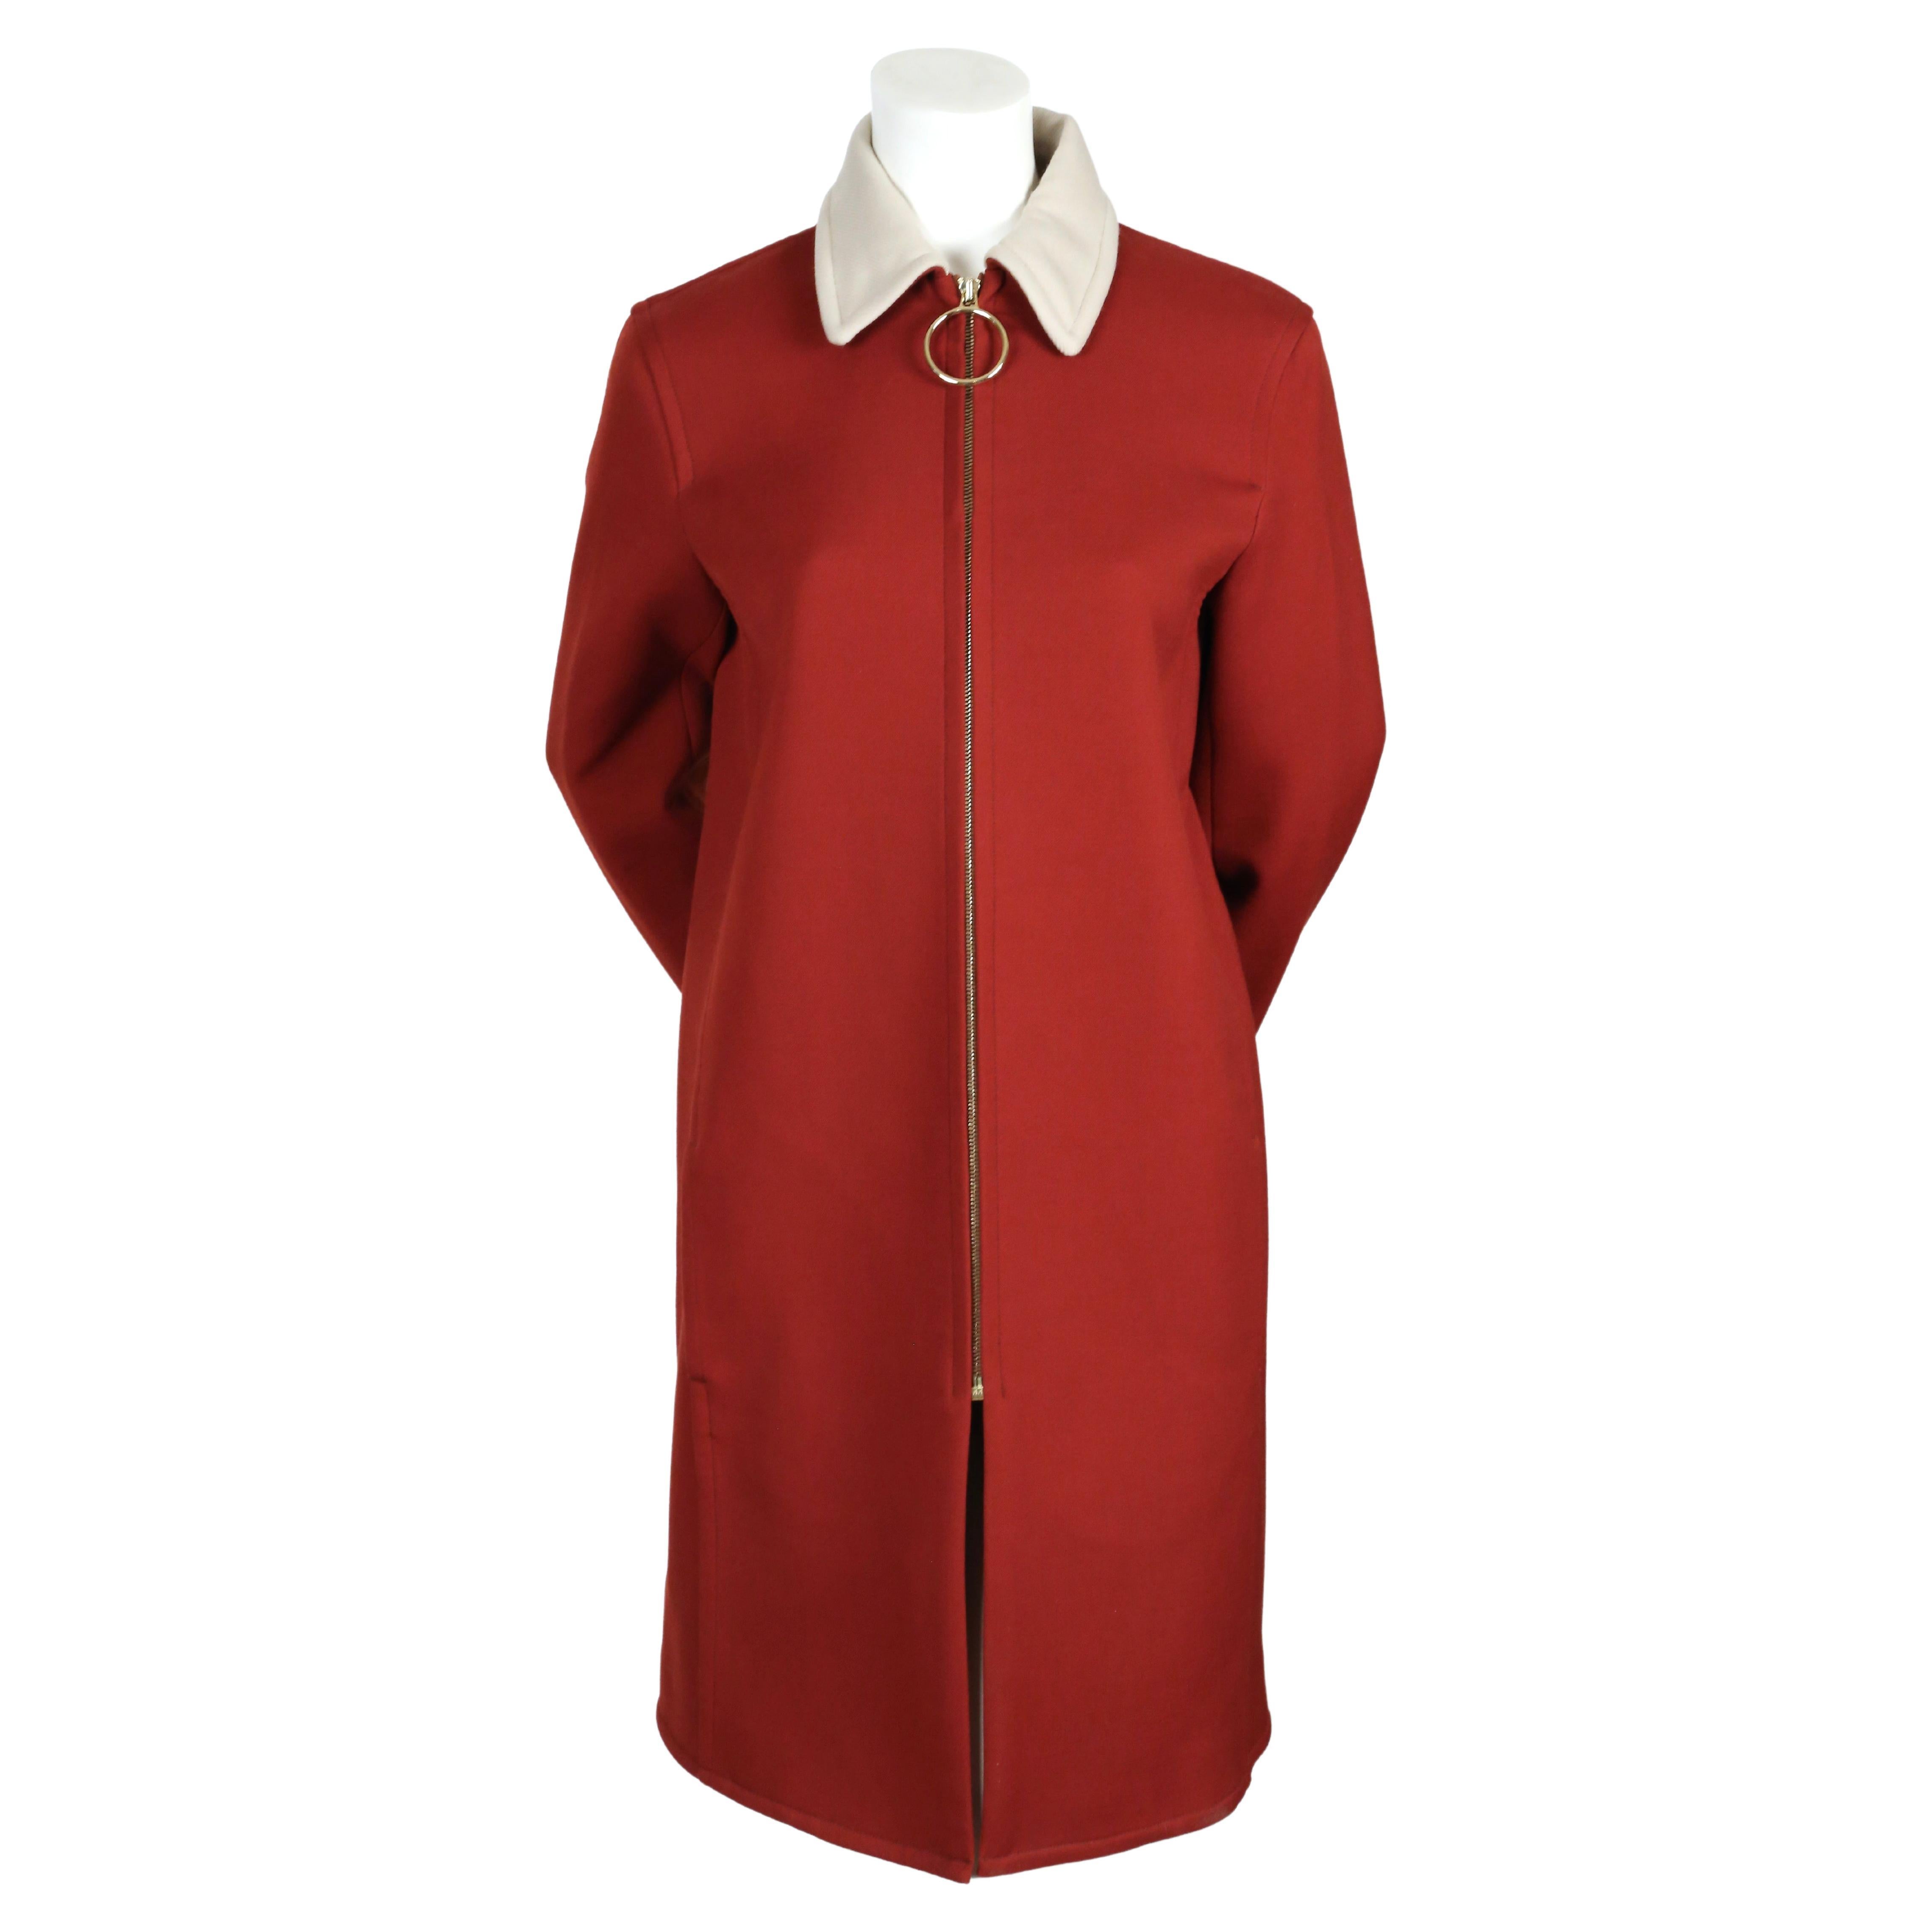  Rust colored gabardine wool coat with off-white collar and gold-tone O-ring ziper designed by Phoebe Philo for Celine exactly as seen in the pre-fall 2015 collection.  French size 38. The coat was not clipped on the size 2 mannequin. Approximate